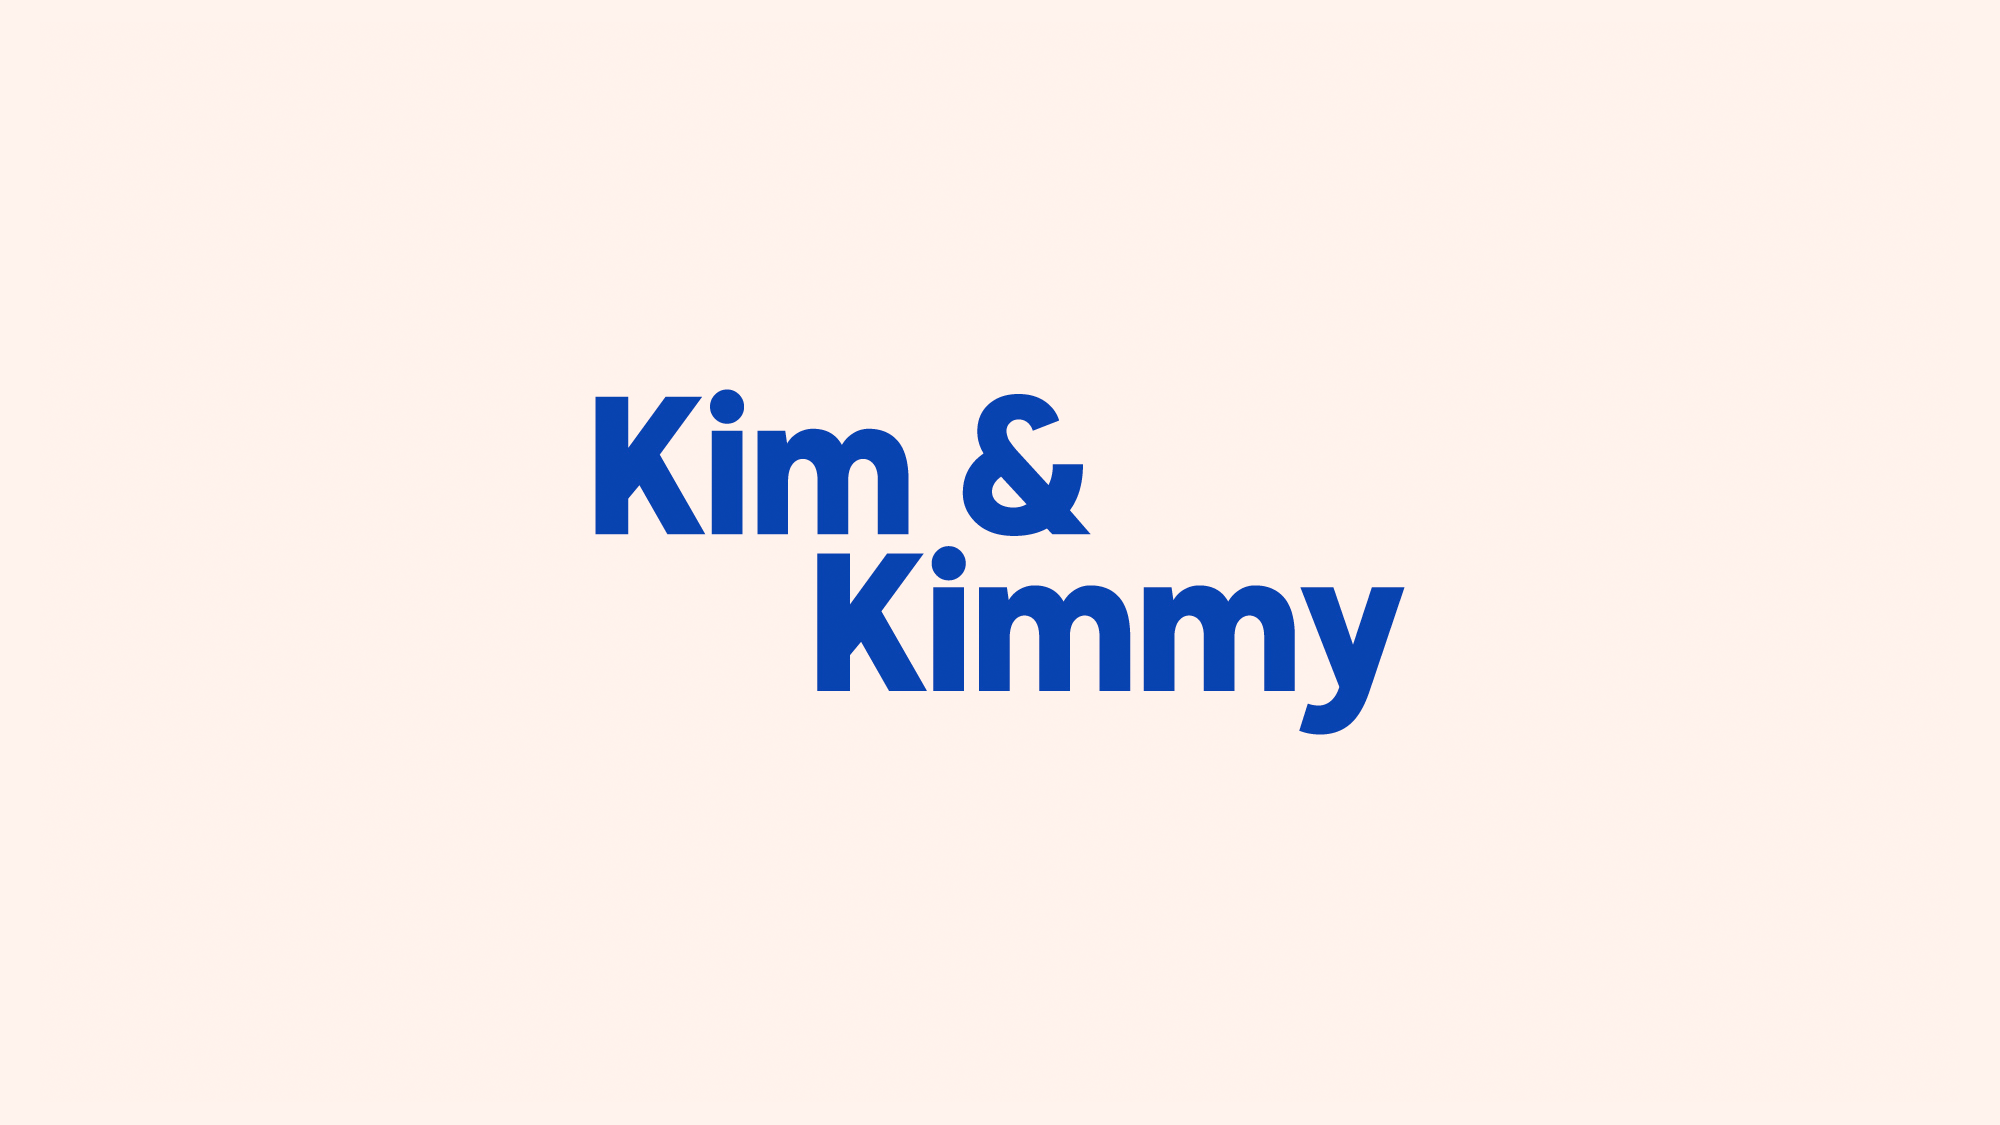 Brand New: New Logo and Packaging for Kim & Kimmy by Poncho